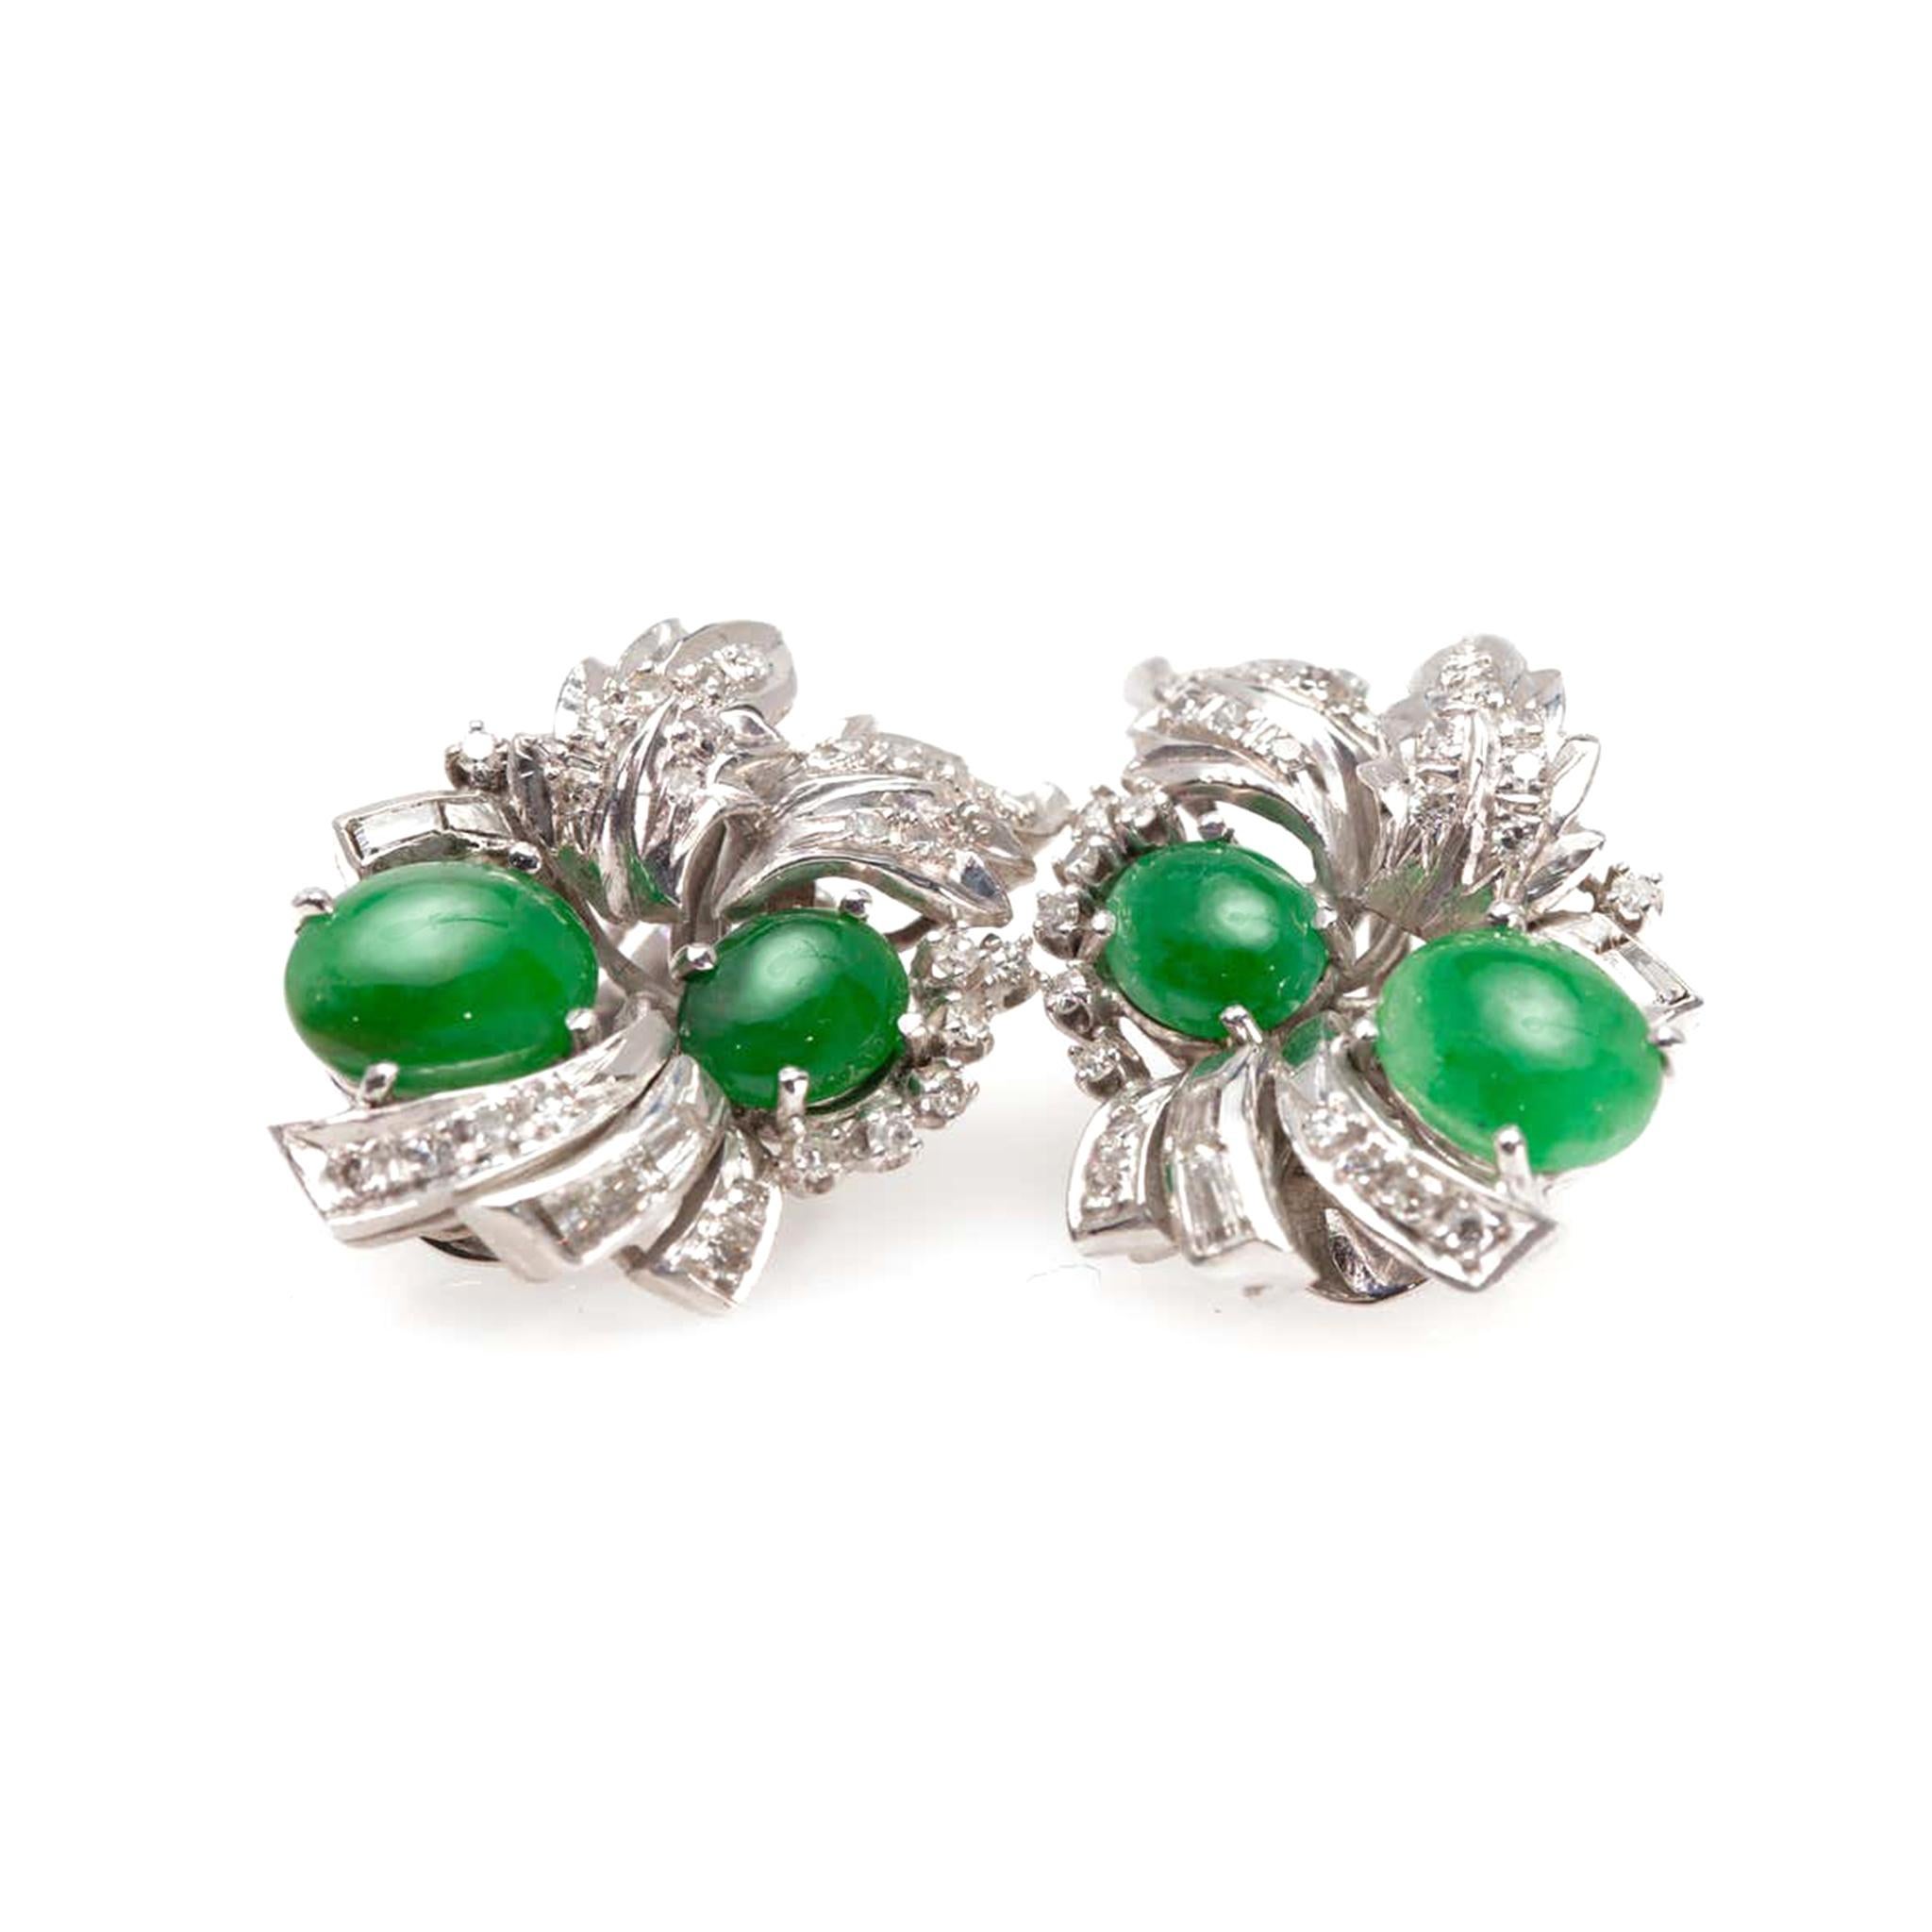 A pair of American natural apple green Jadeite jade and Diamond clip-on earrings from the 1940s - 1950s in 18K white gold. Featuring a delicate foliage design, each of this pair of clip-on earrings presents two natural apple green jadeite jade of